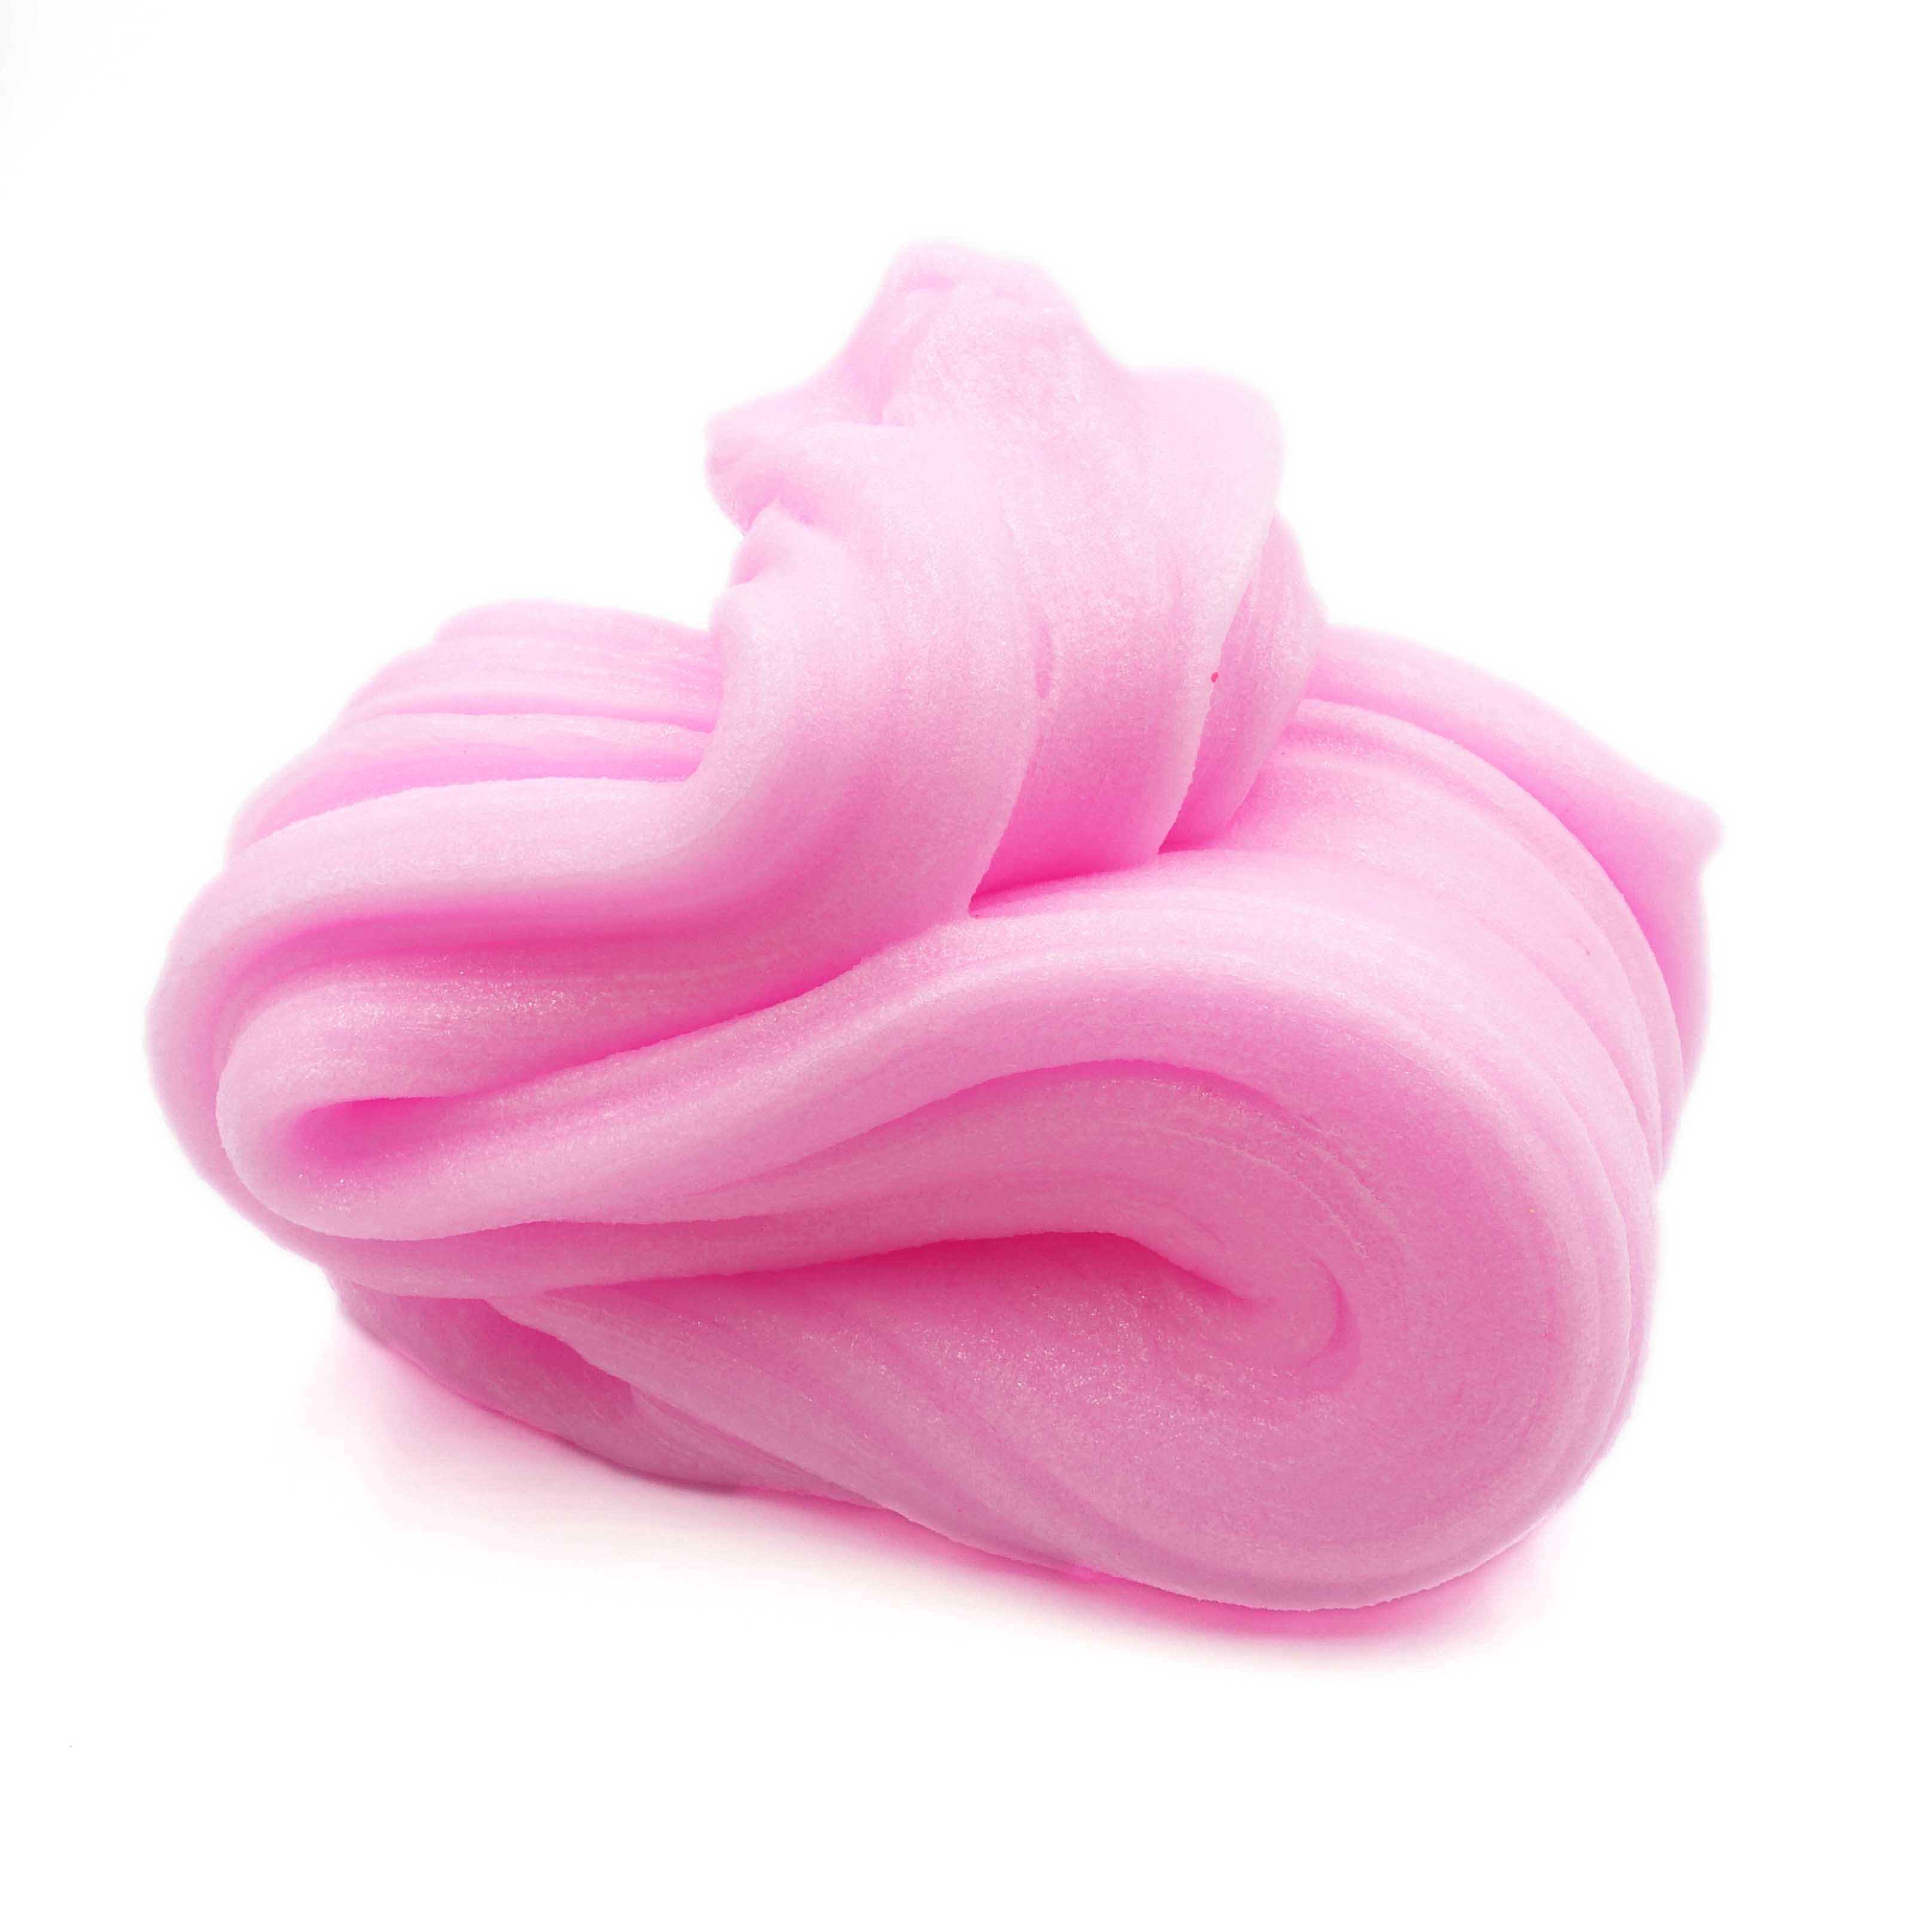 Bubble Gum Freeze Pink Jelly Slime Fantasies Swirl Layered